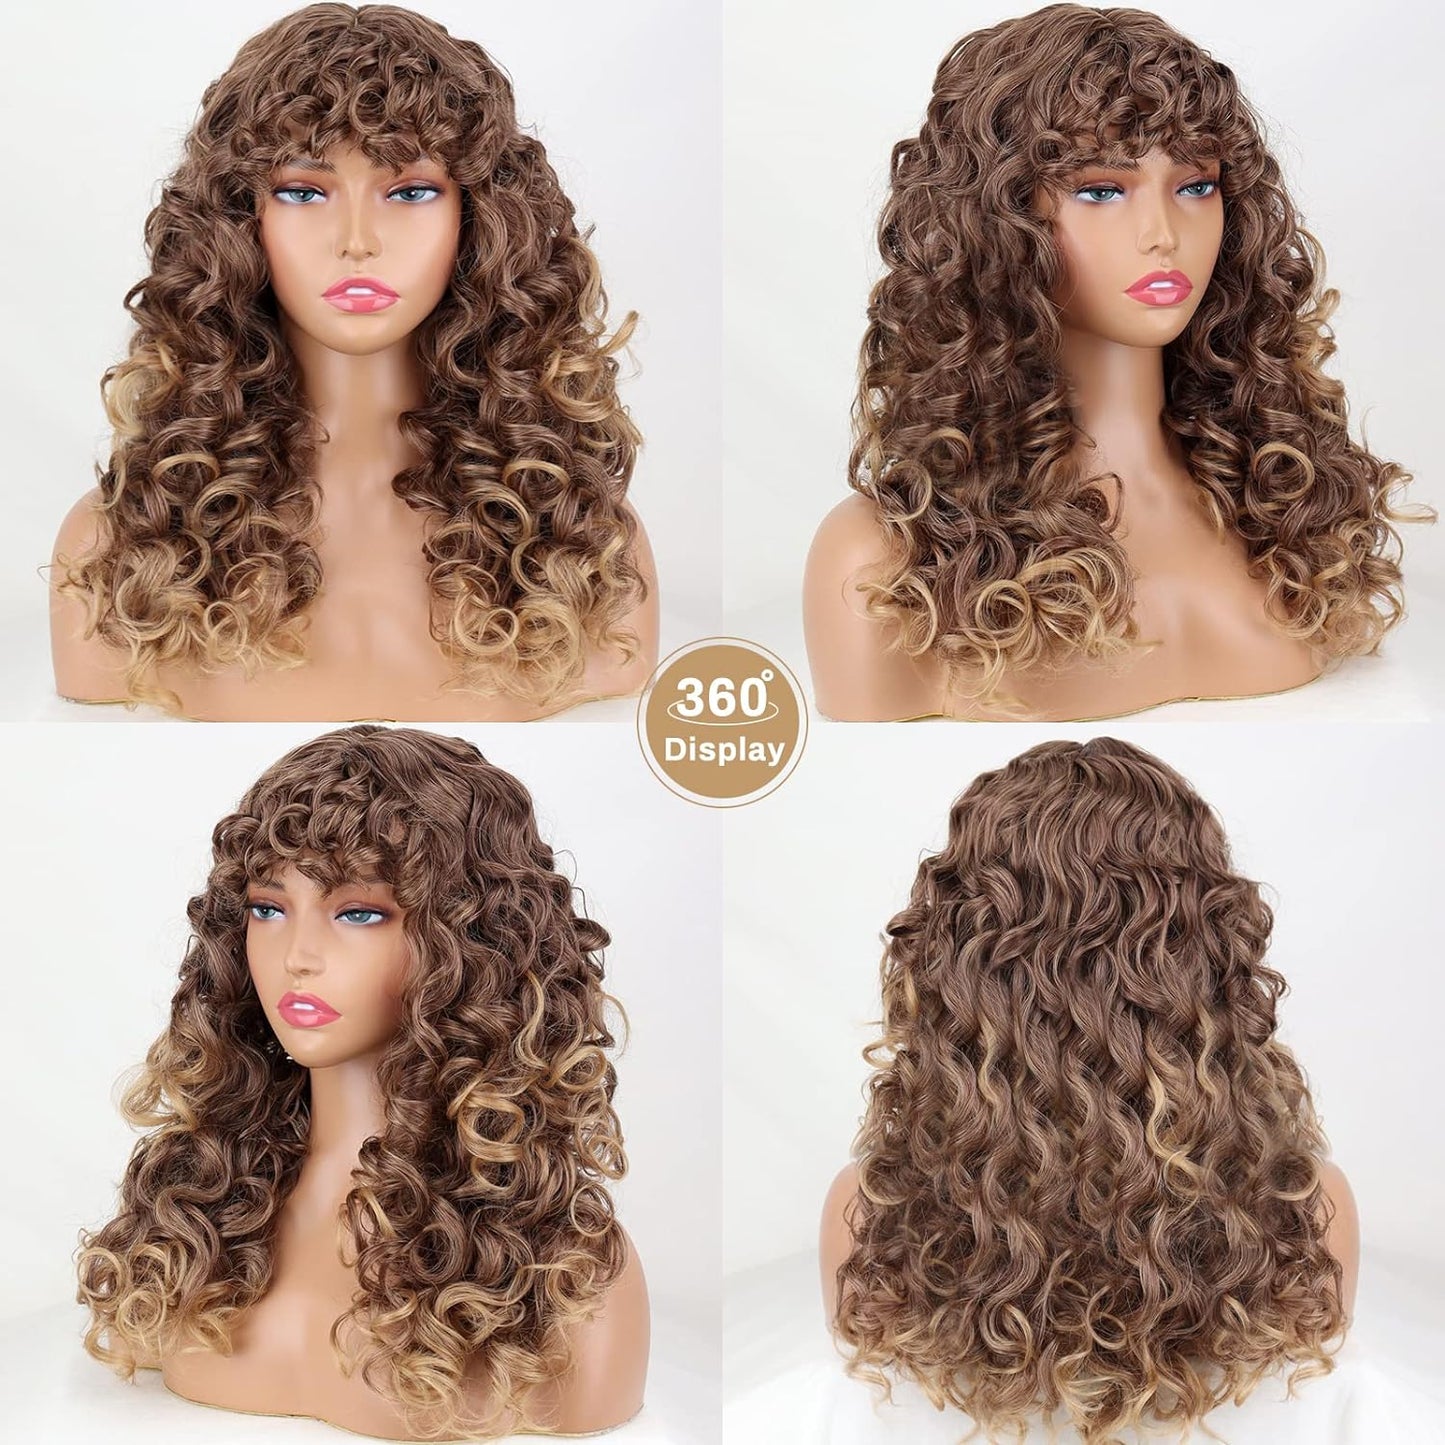 14 inch Blonde Curly Wigs 70s, Kinky Brown Mixd Blonde Afro Wigs for Black Women, Synthetic Afro Curly Blonde Wigs for Women (Brown to Blonde)